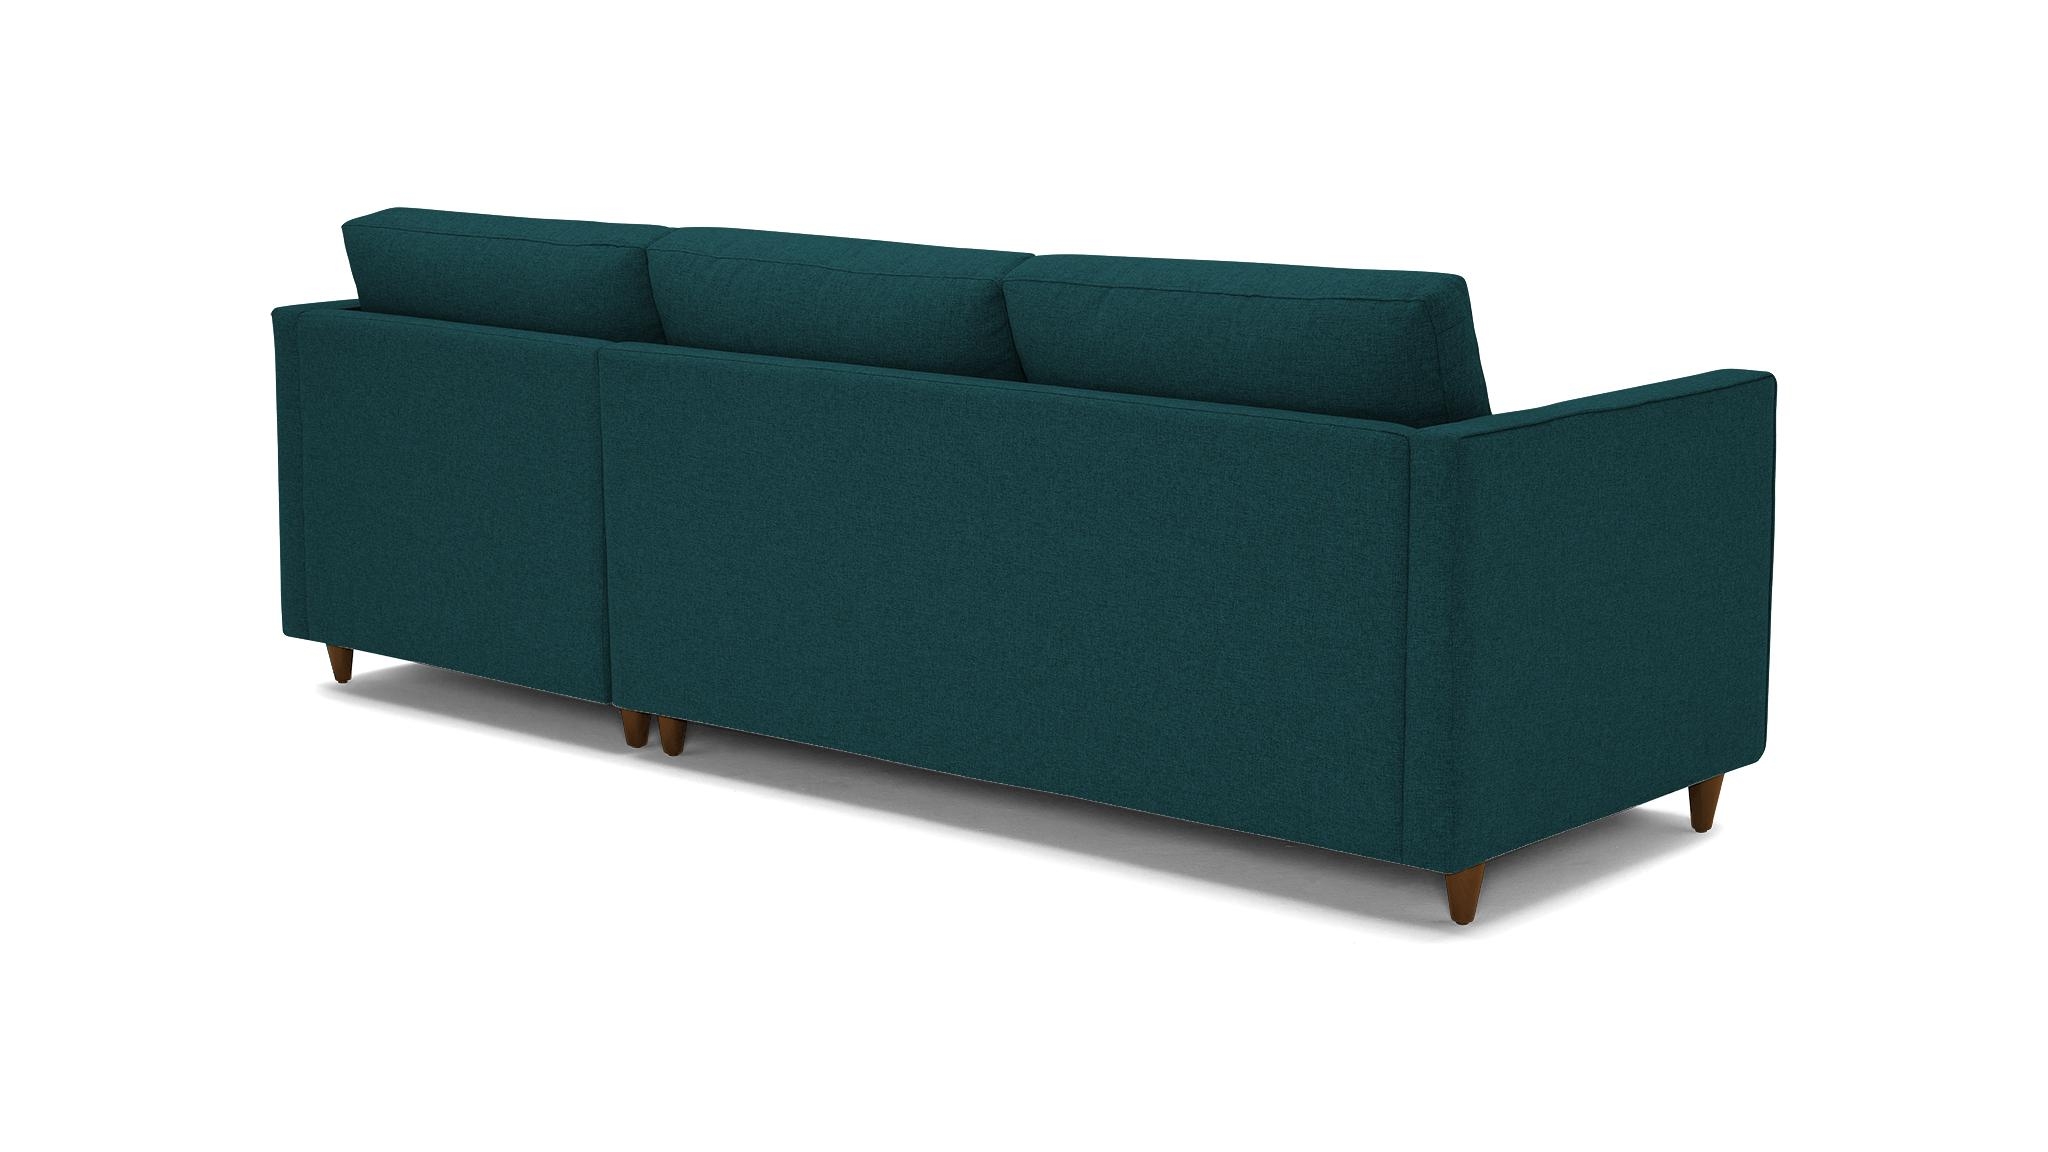 Blue Briar Mid Century Modern Sectional with Storage - Royale Peacock - Mocha - Left - Image 4